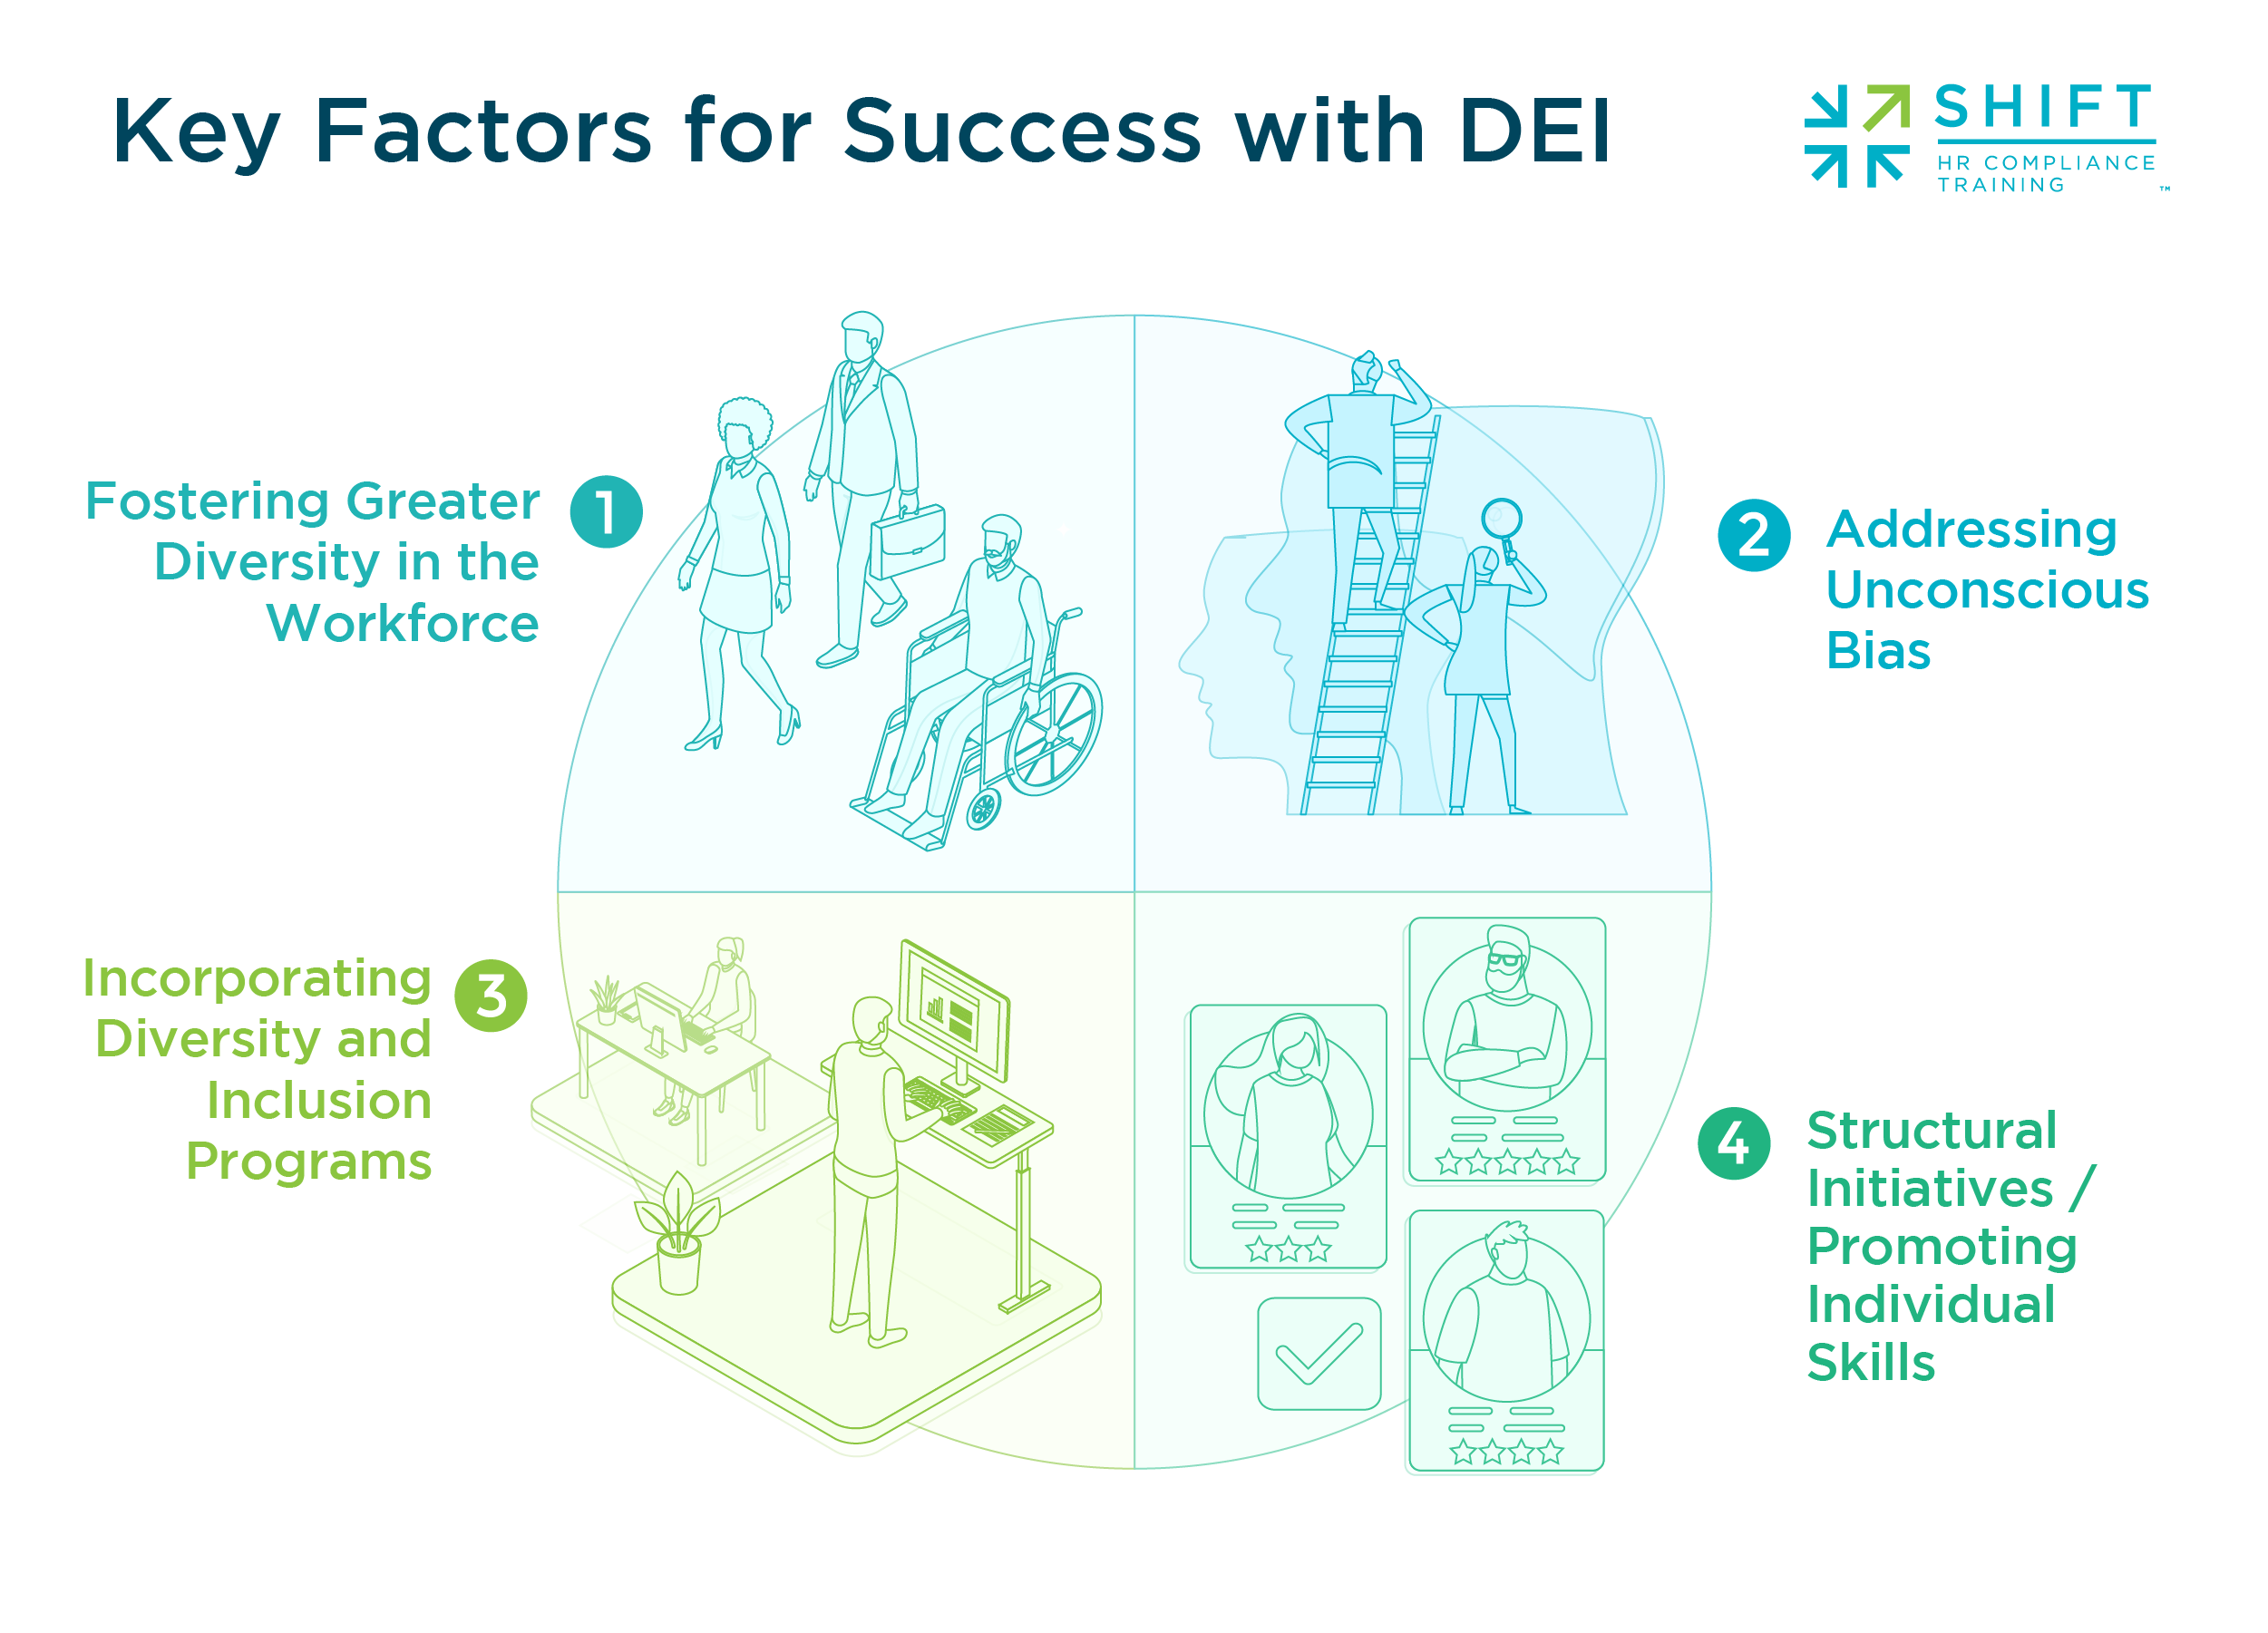 Key factors for success with DEI